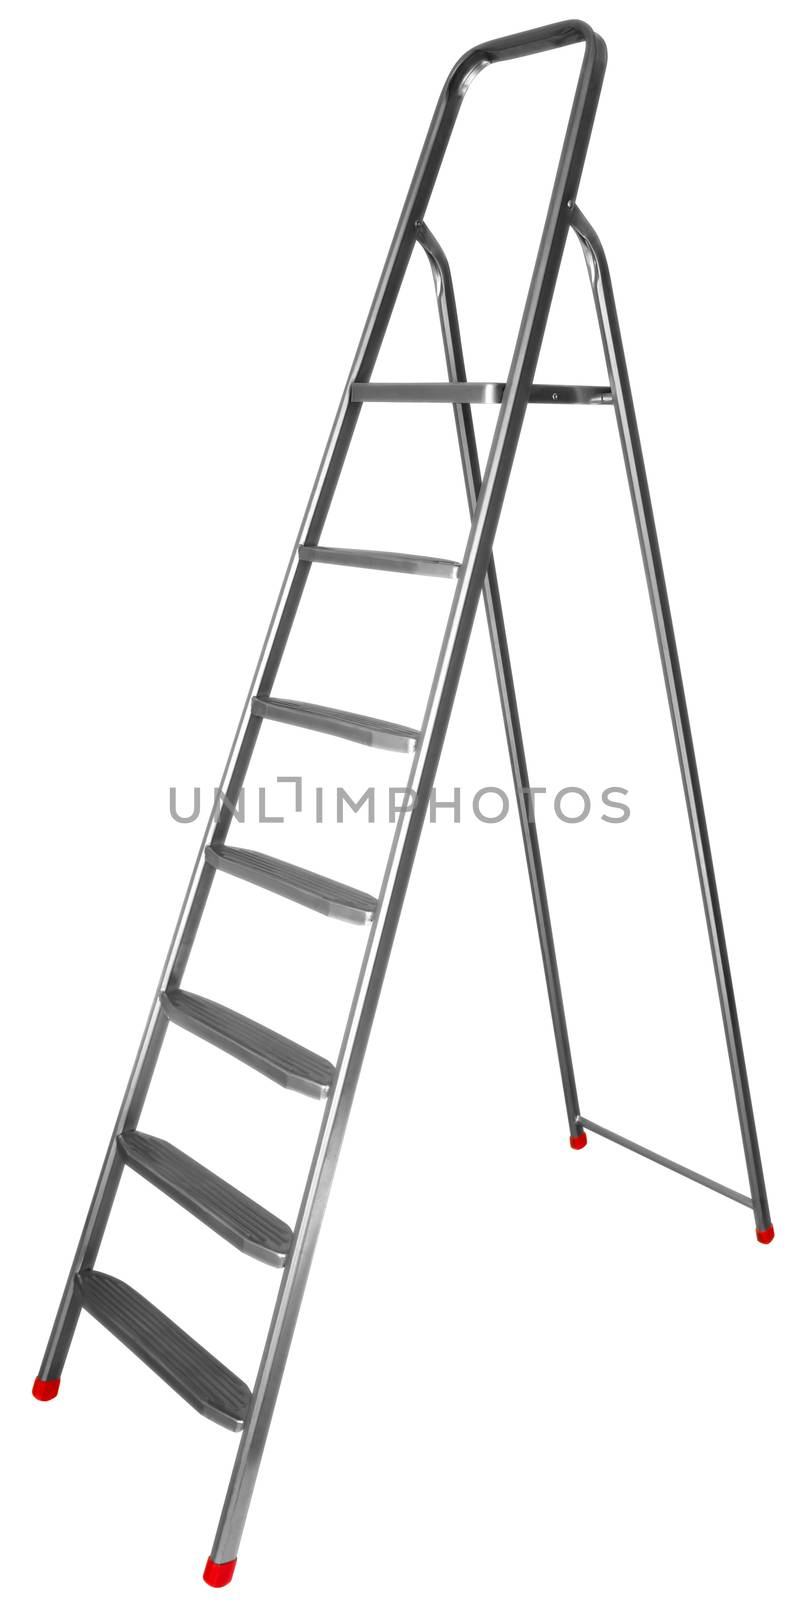 Step-ladder with seven steps isolated on white background. Clipping path includes.